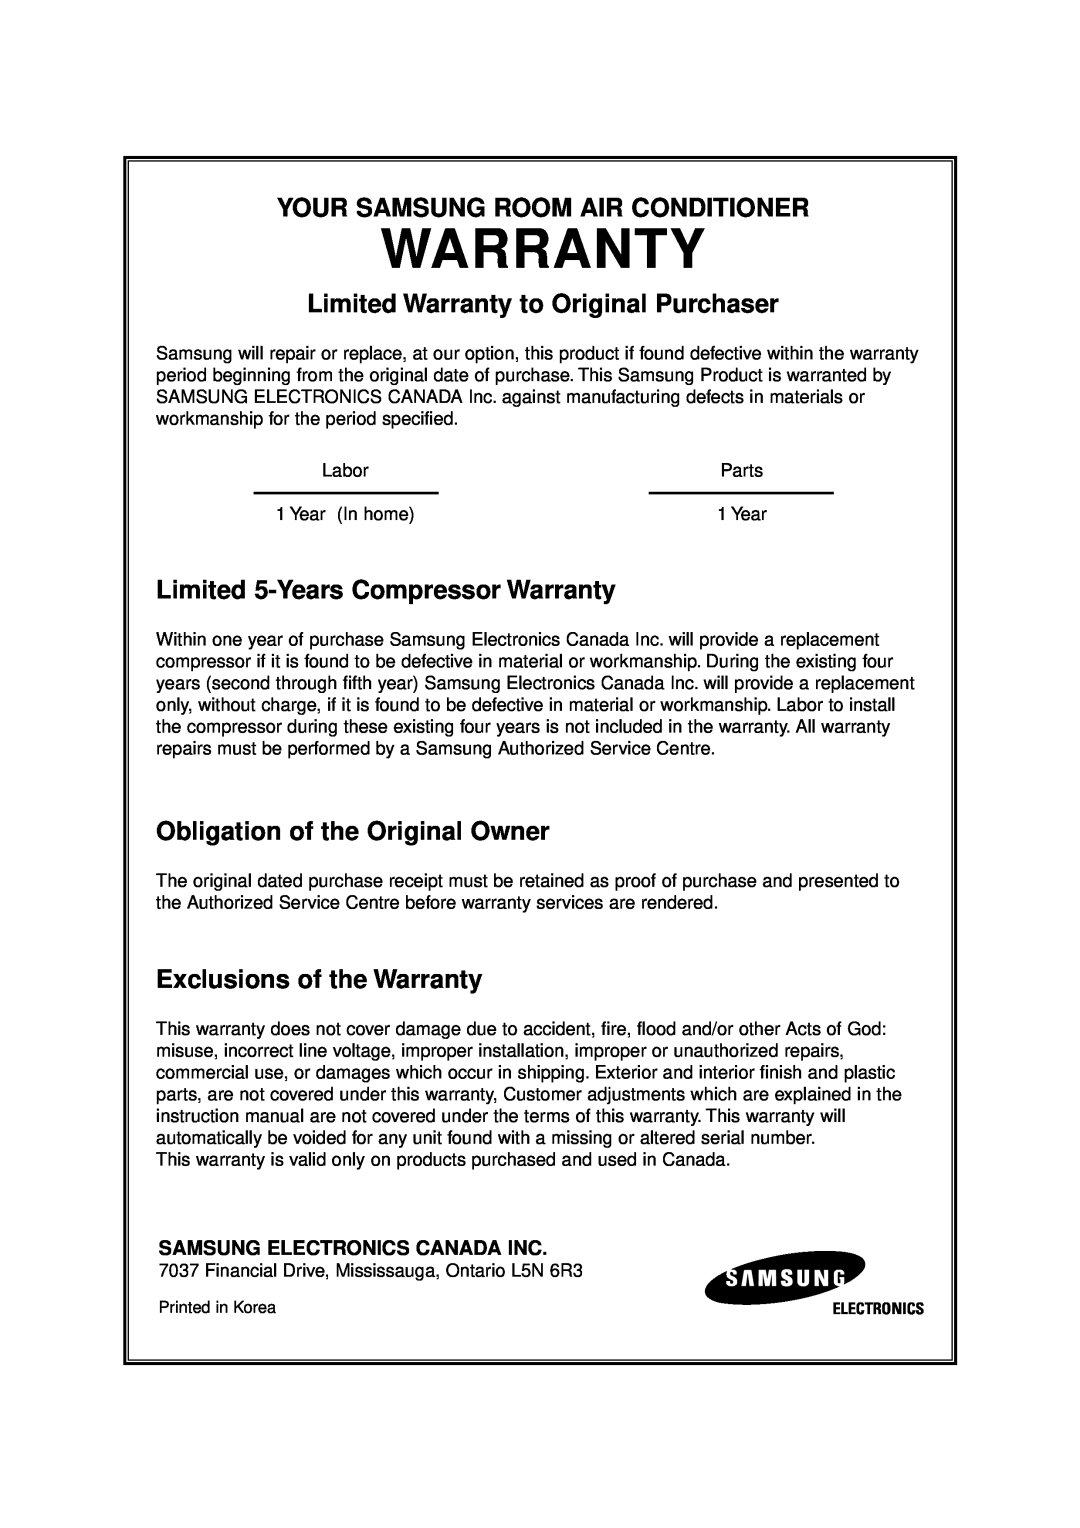 Samsung AW0690 Your Samsung Room Air Conditioner, Limited Warranty to Original Purchaser, Obligation of the Original Owner 